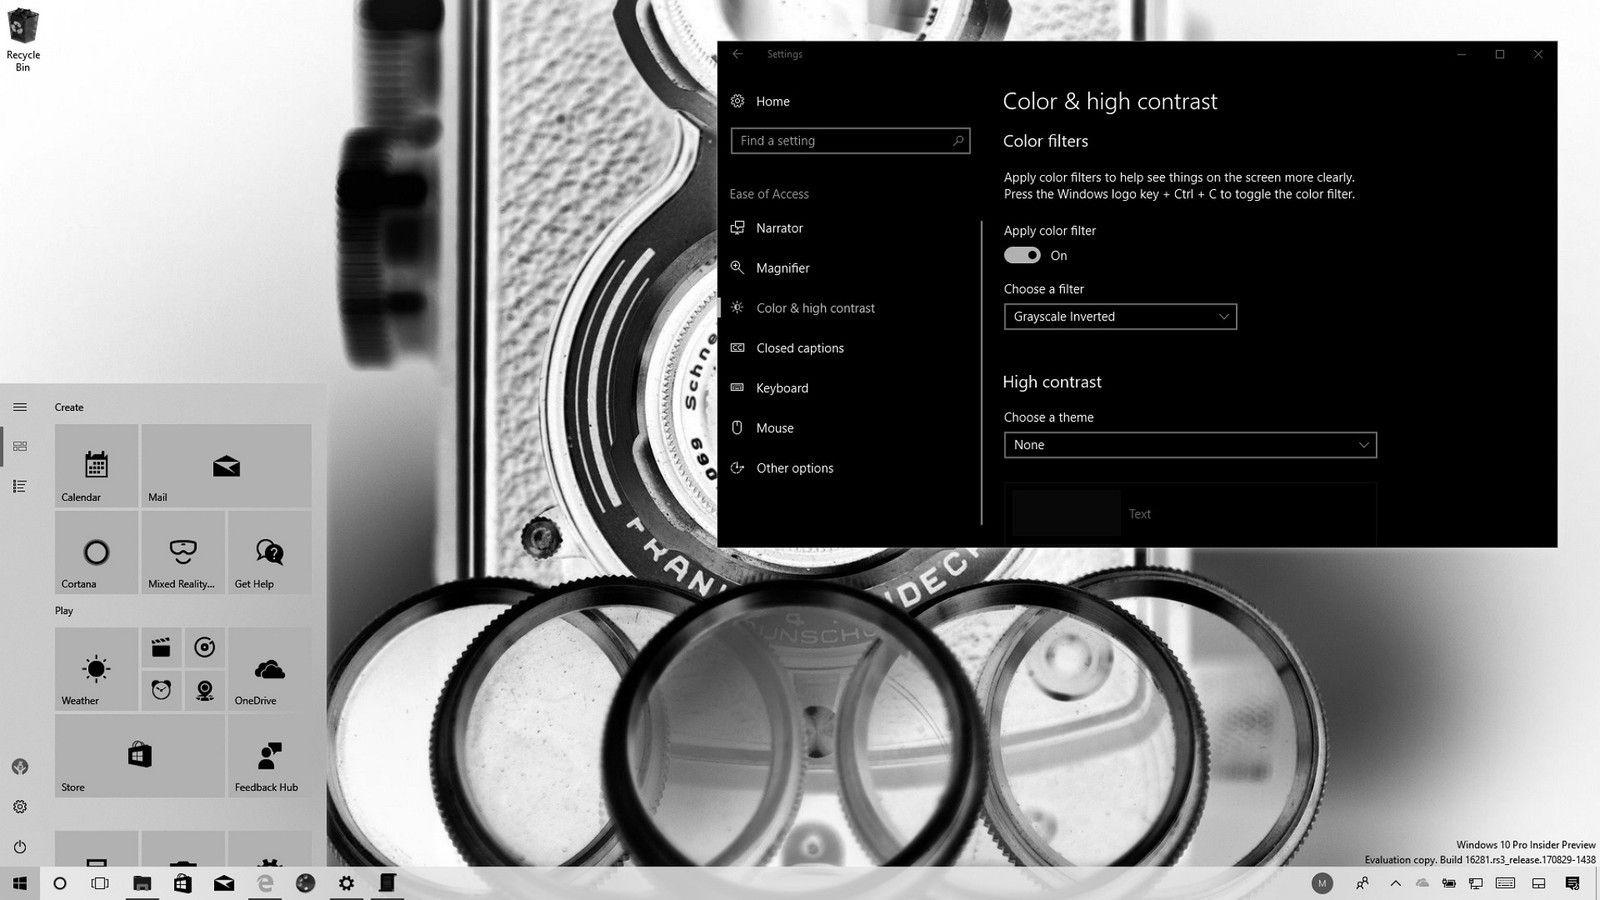 Black and White Windows Logo - How to enable color filters in the Windows 10 Fall Creators Update ...